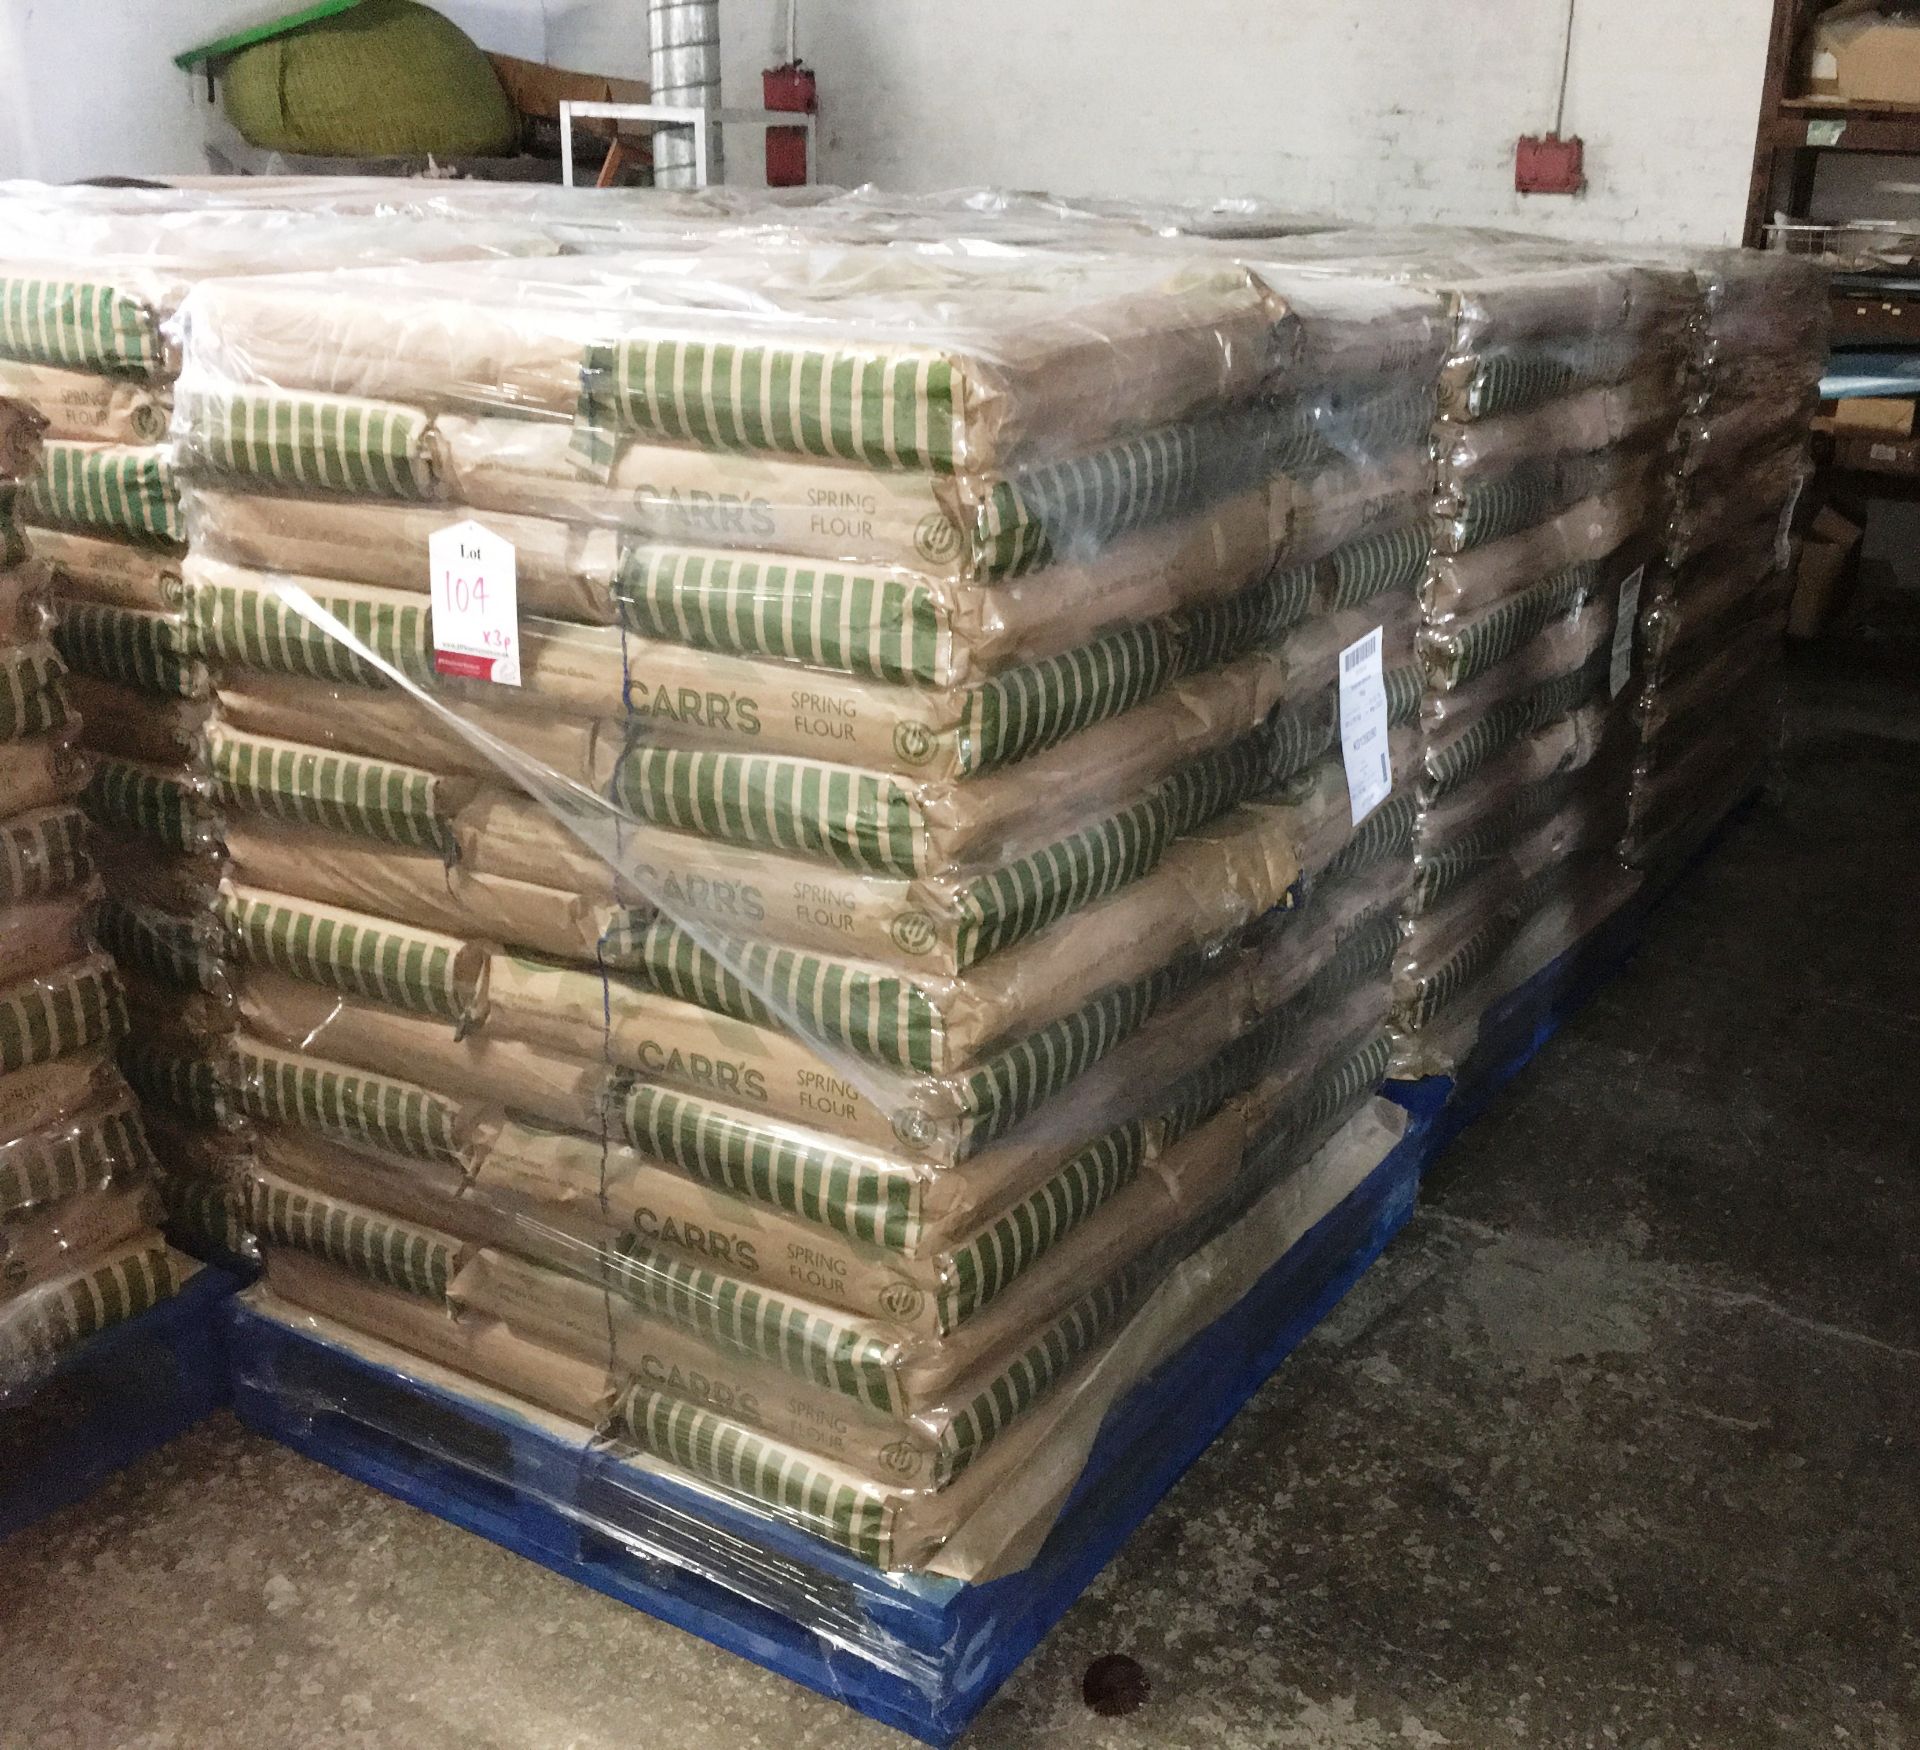 3 x Pallets of Carrs Spring Flour - Approximately 65 Bags per Pallet